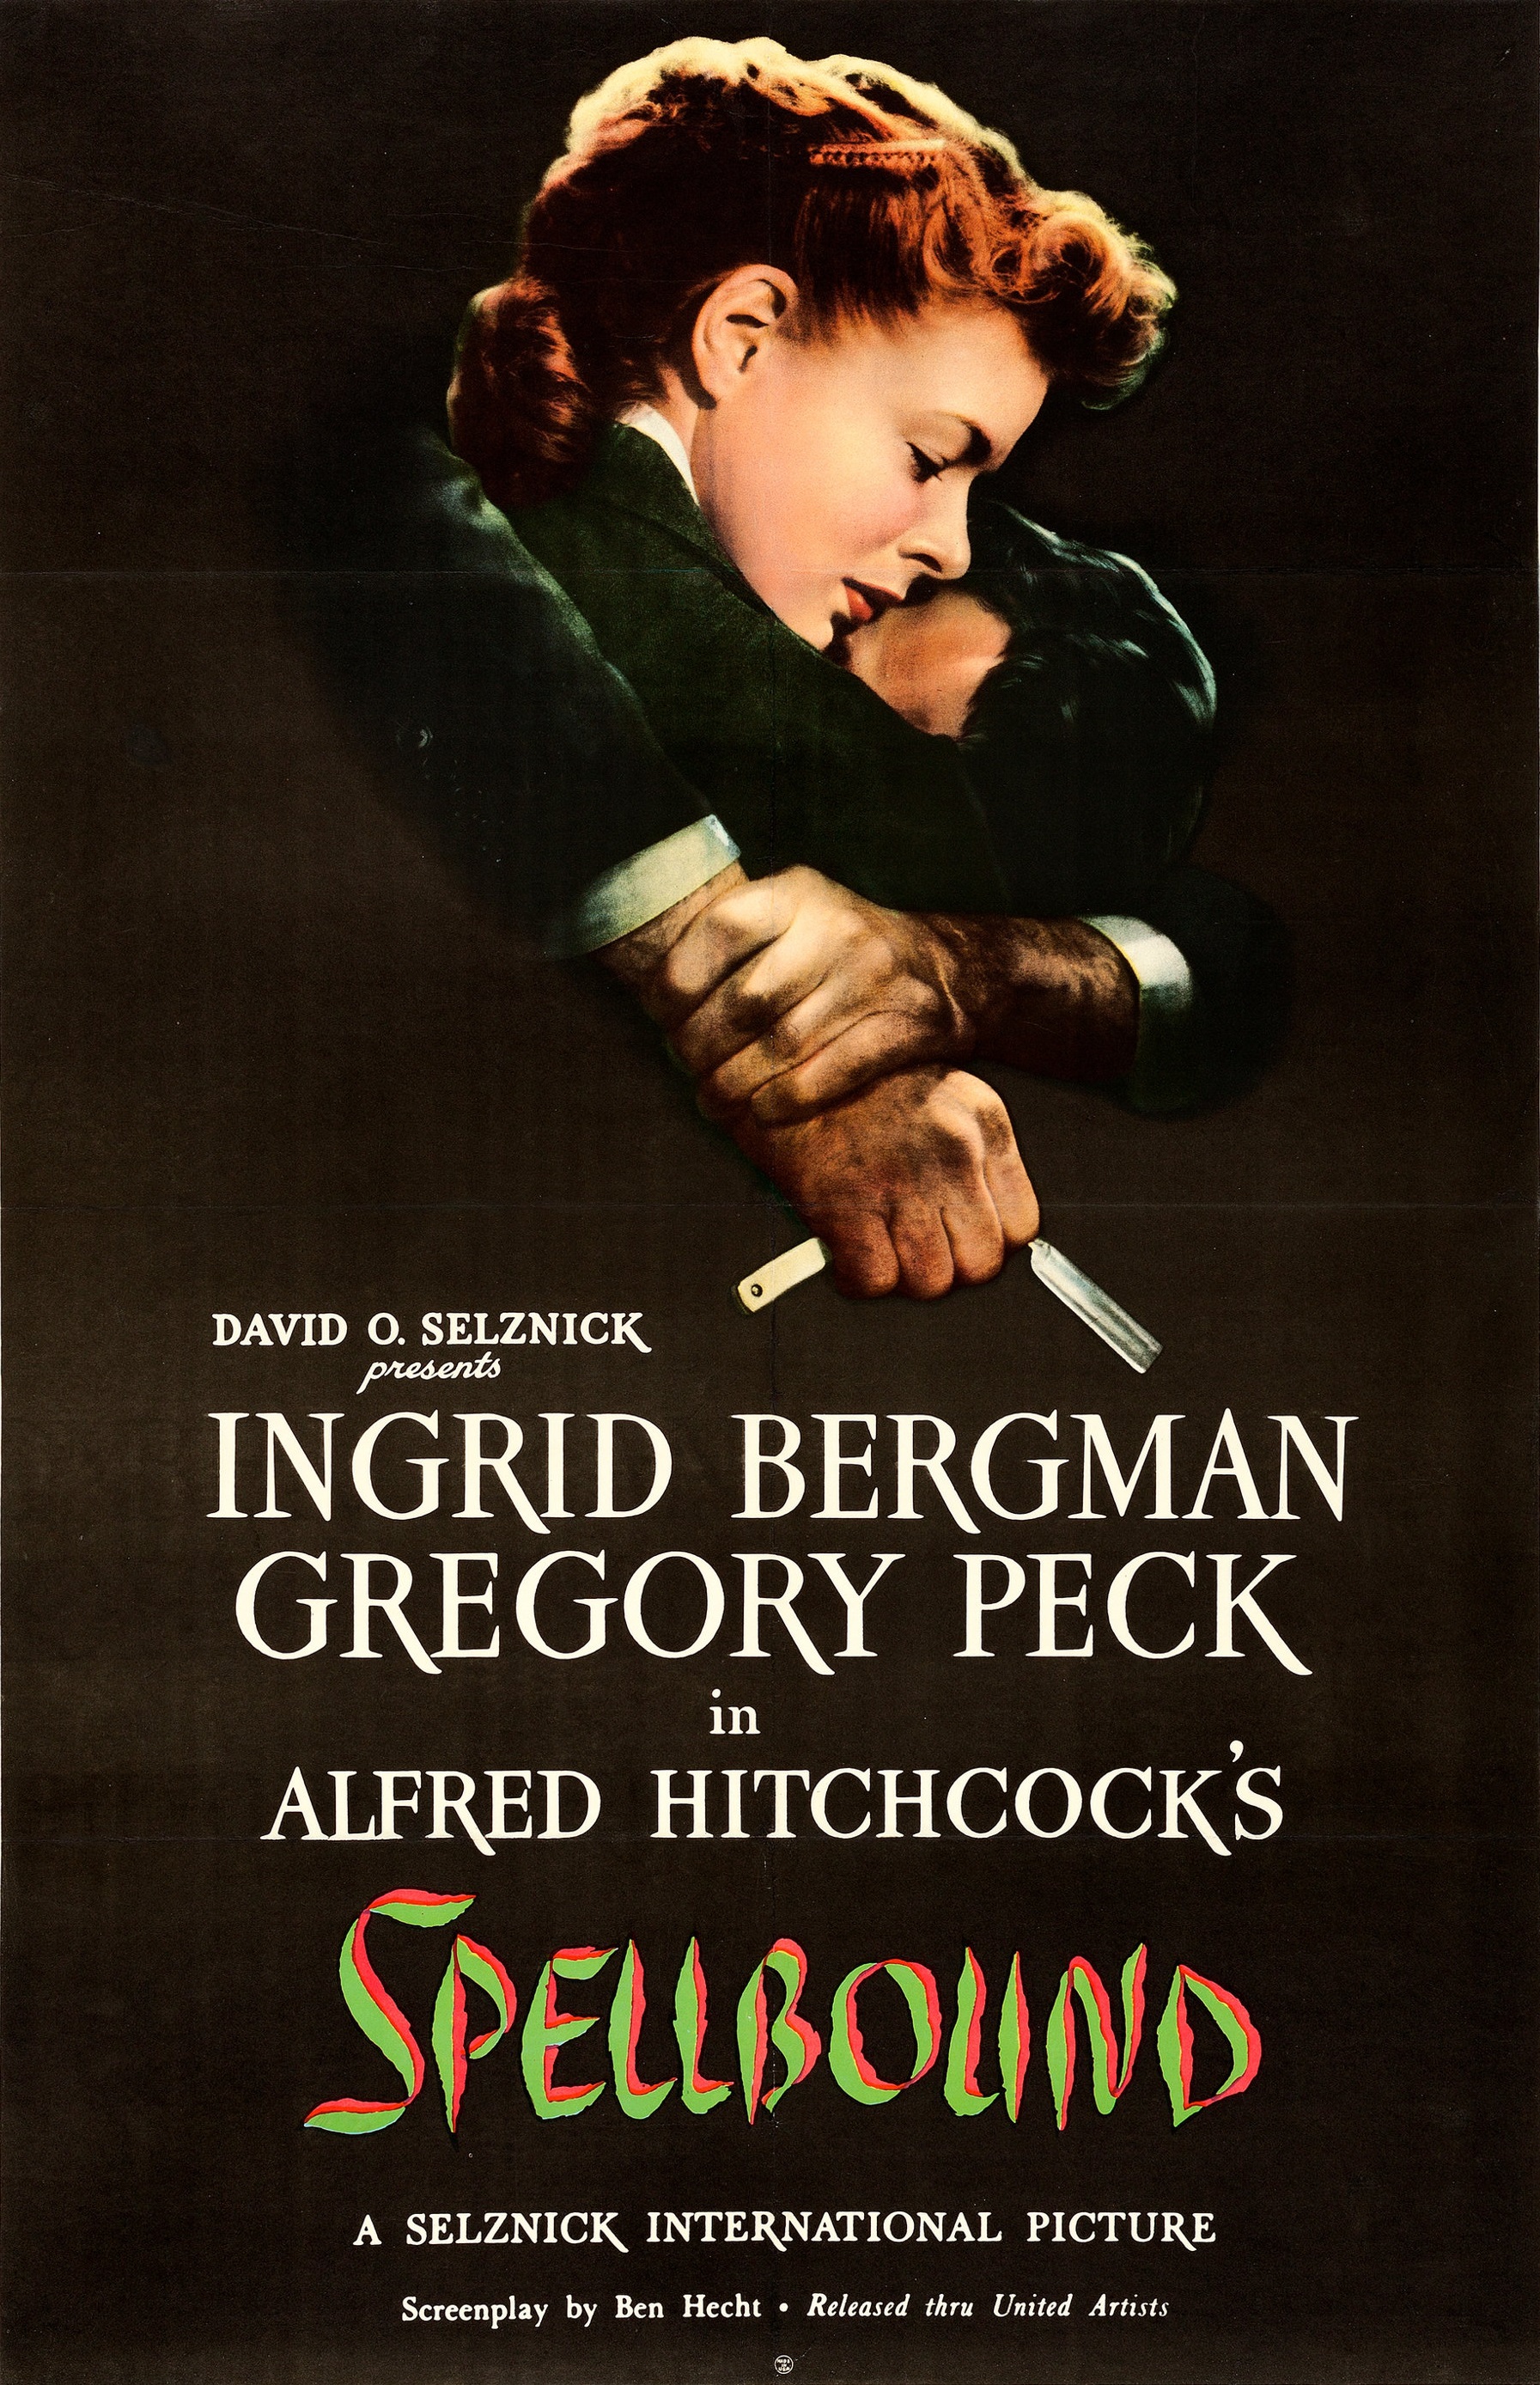 When Dr. Anthony Edwardes (Gregory Peck) arrives at a Vermont mental hospital to replace the outgoing hospital director, Dr. Constance Peterson (Ingrid Bergman), a psychoanalyst, discovers Edwardes is actually an impostor.